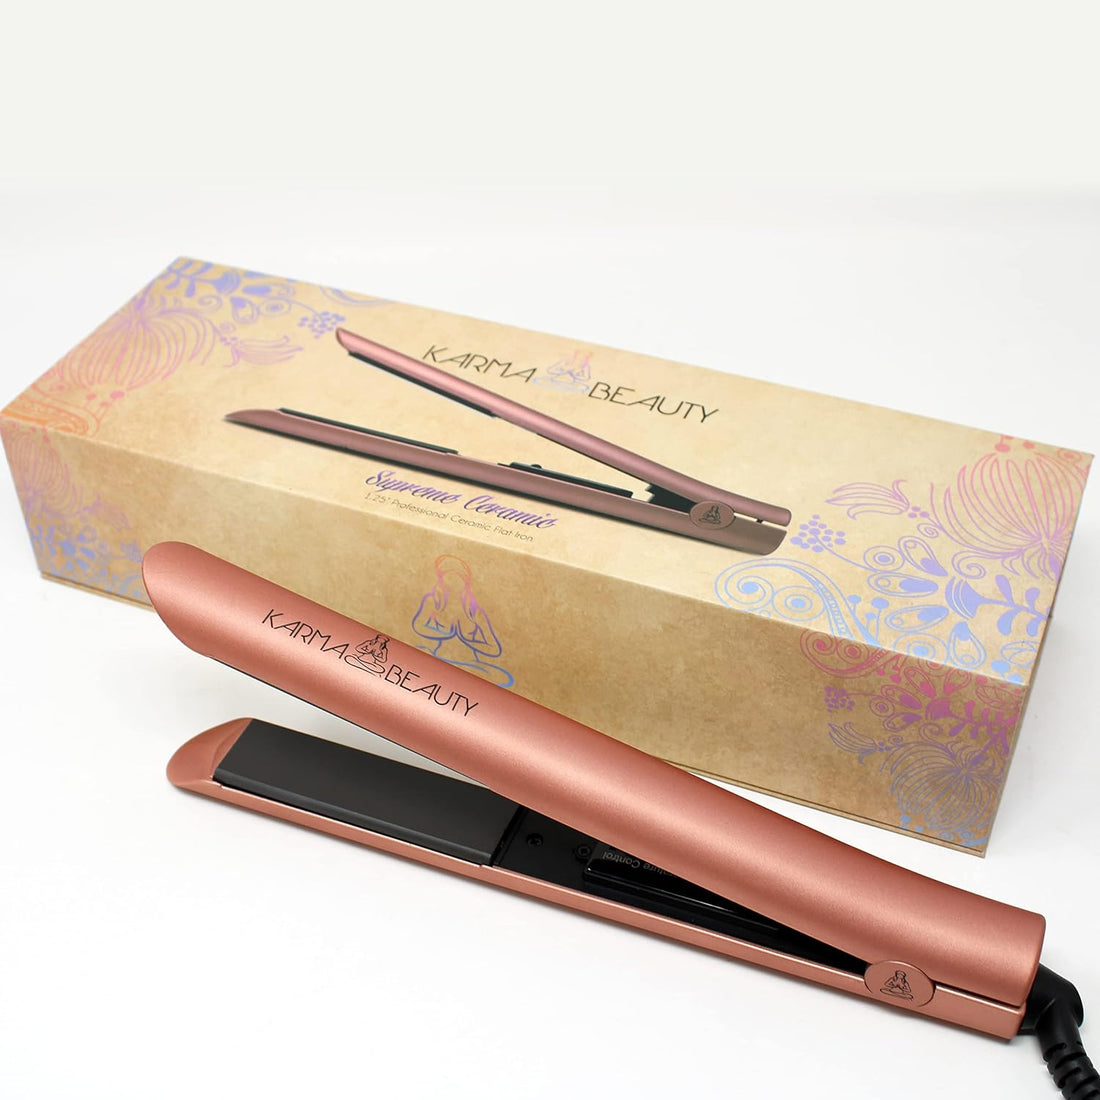 Supreme Ceramic Flat Iron 2.0 Ceramic Hair Straightener | 450° F High Heat | Create Straight & Curly | Dual Voltage | Adjustable Temperature | for All Hair Types | Karma Beauty (Rose Gold)